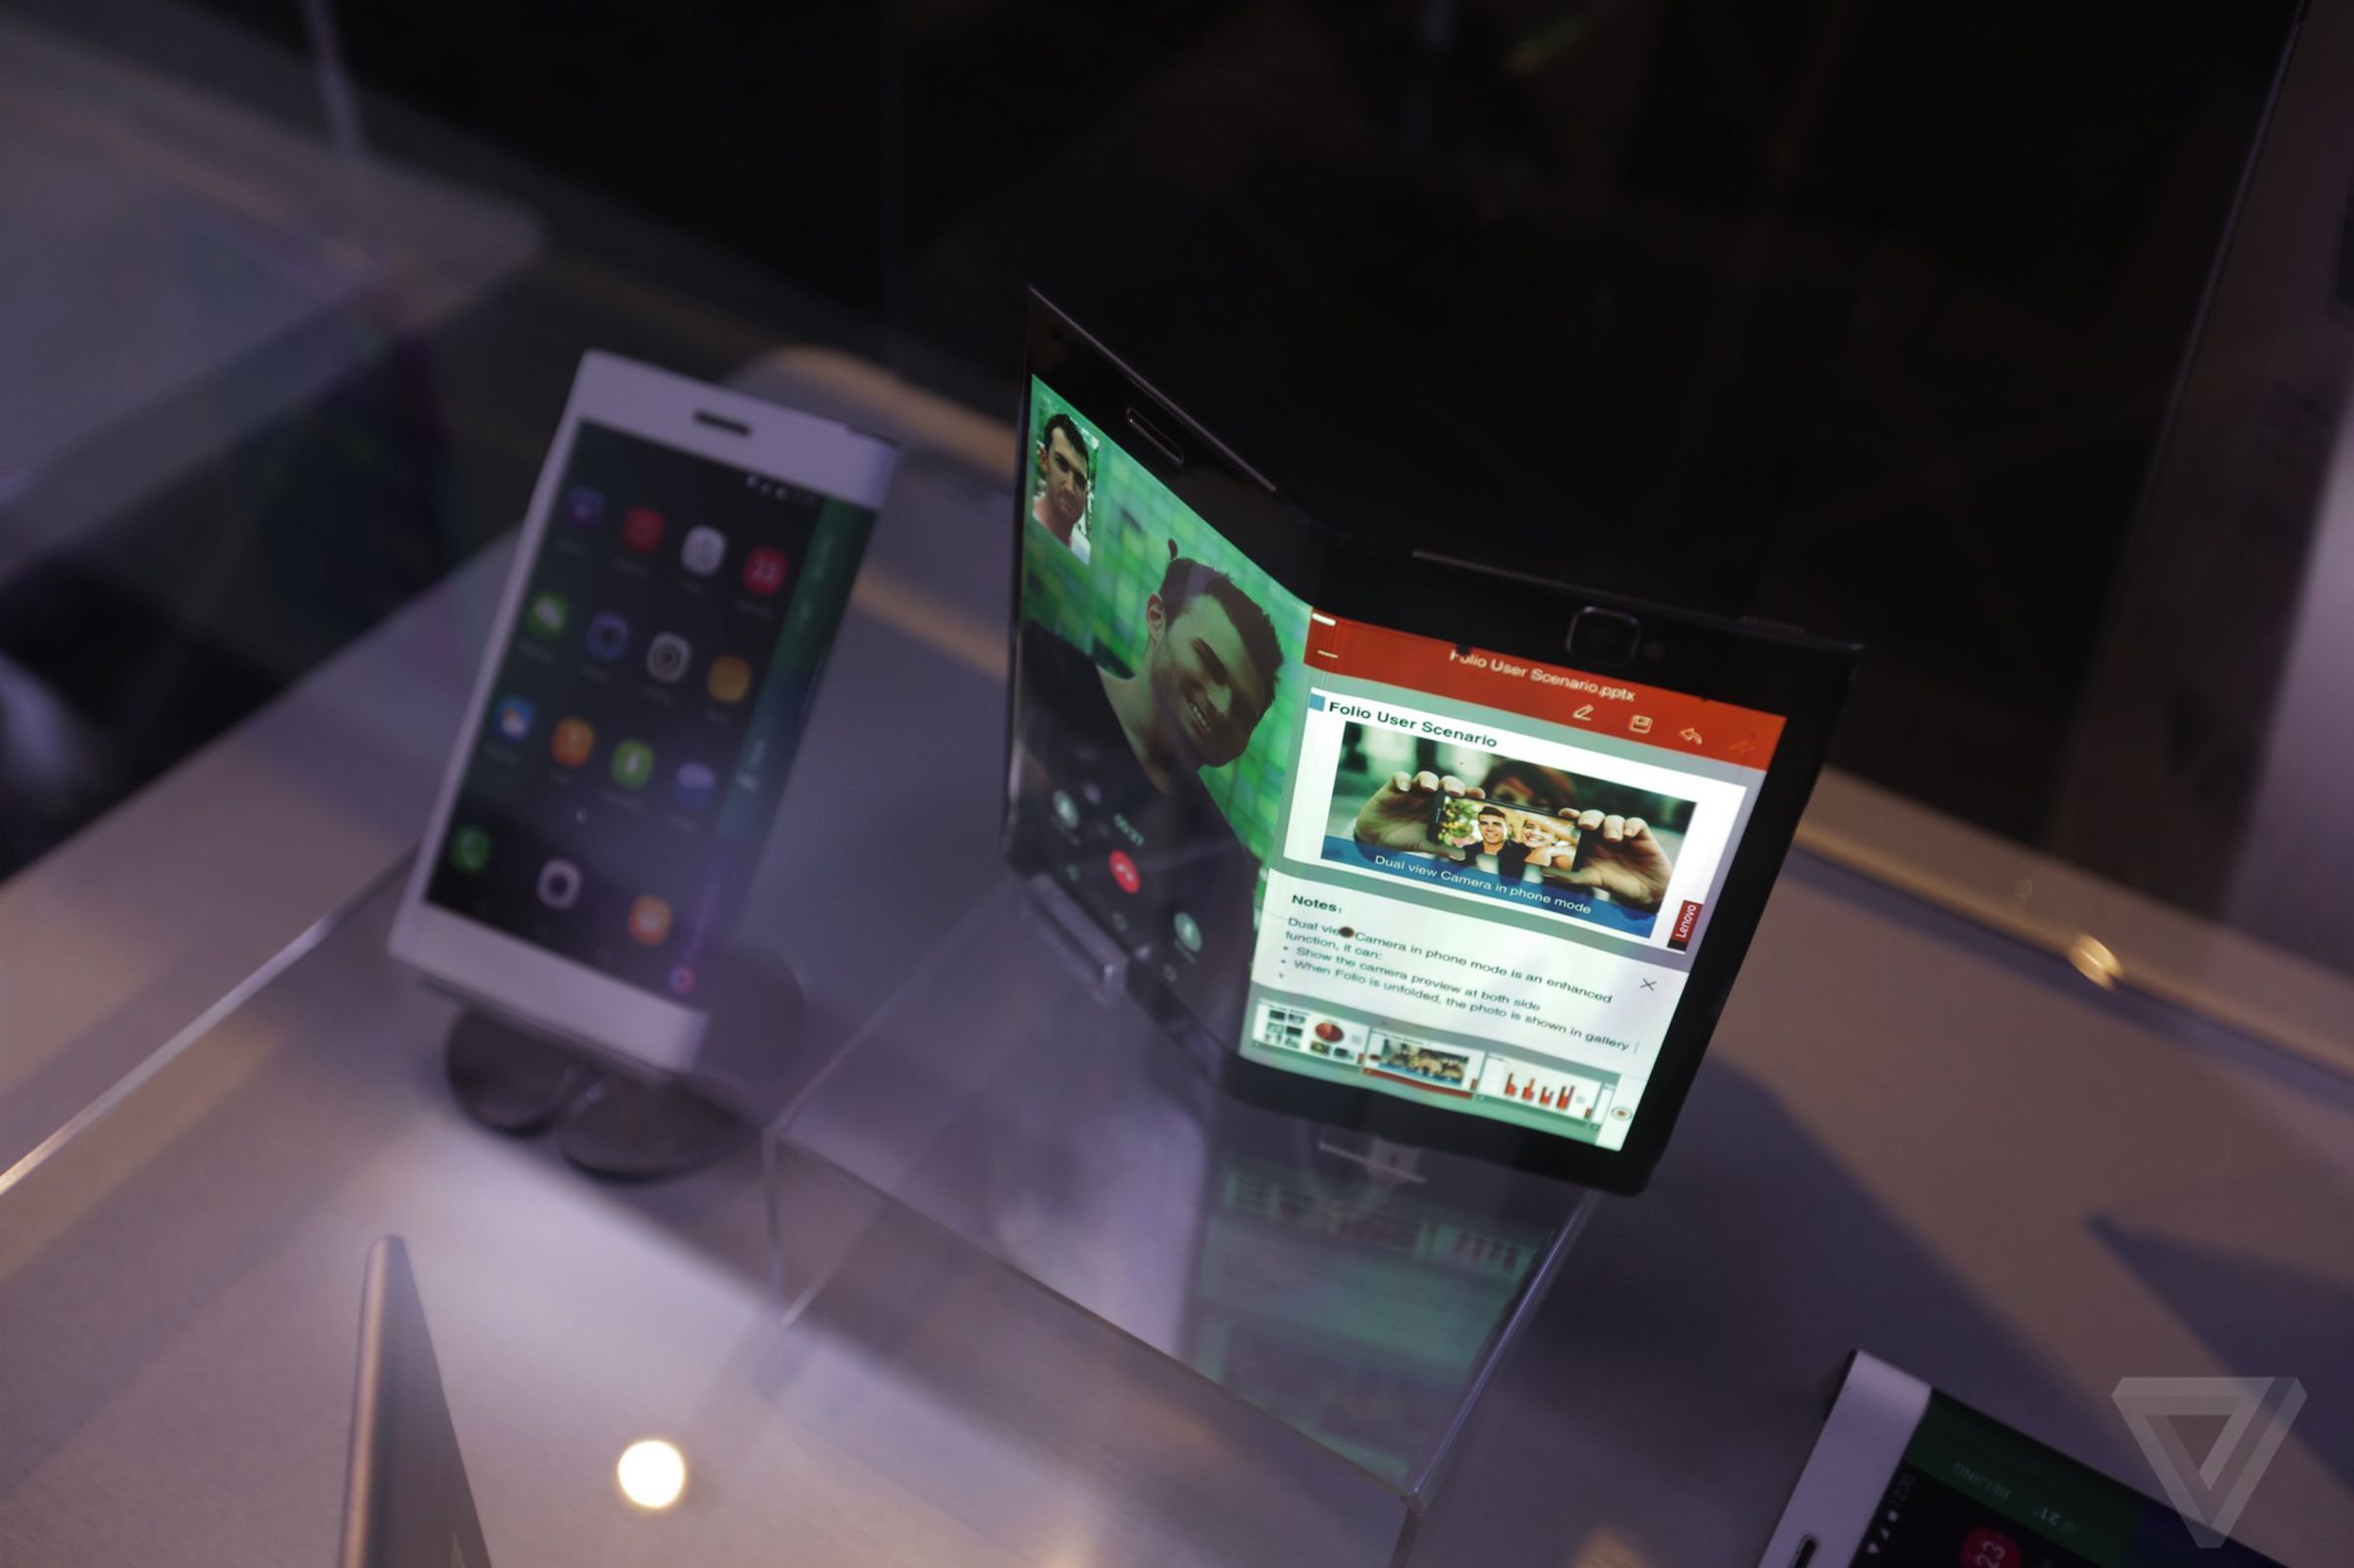 Lenovo's flexible phones and bendable tablets